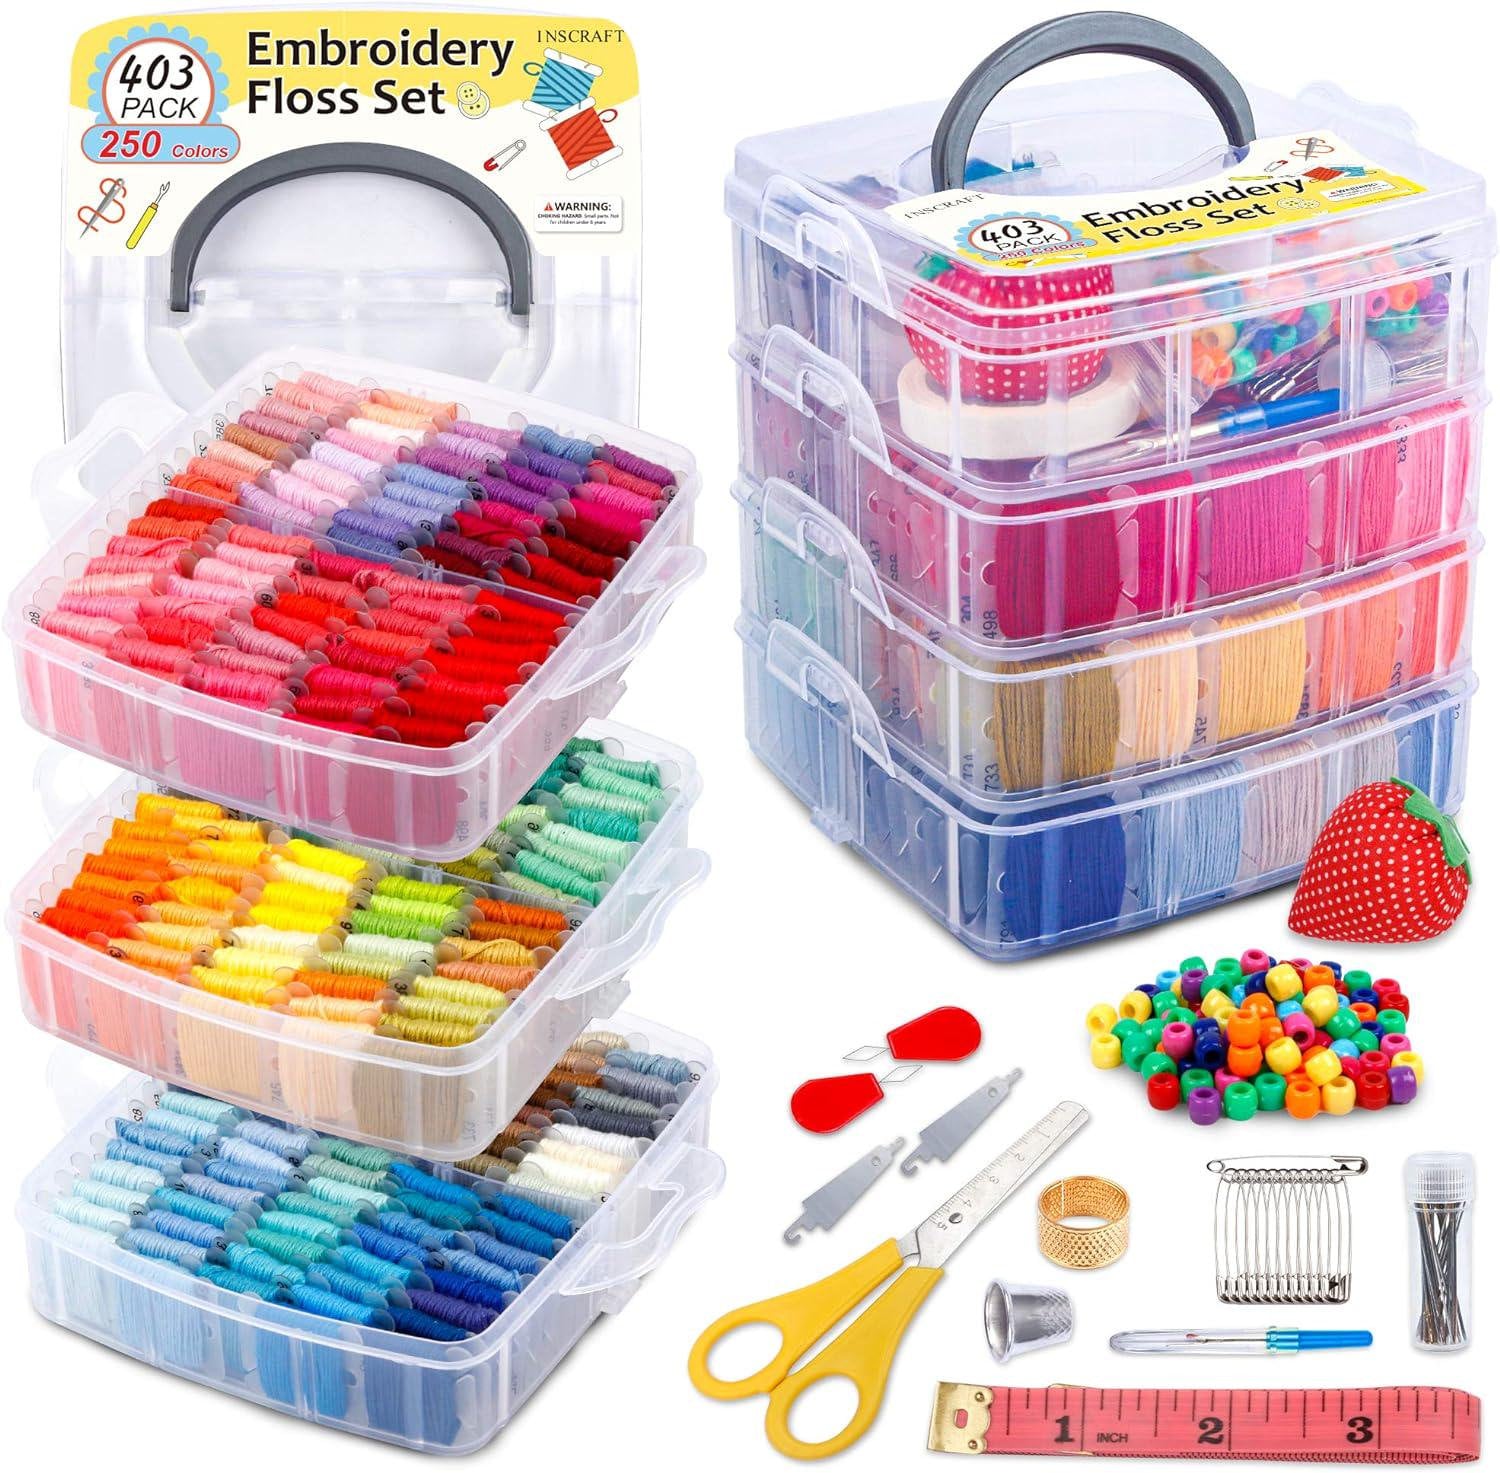 Embroidery Floss for Cross Stitch,embroidery Thread String Kit,80  Skeins,floss Bobbins With Organizer Storage Box,embroidery Floss Start Kit  